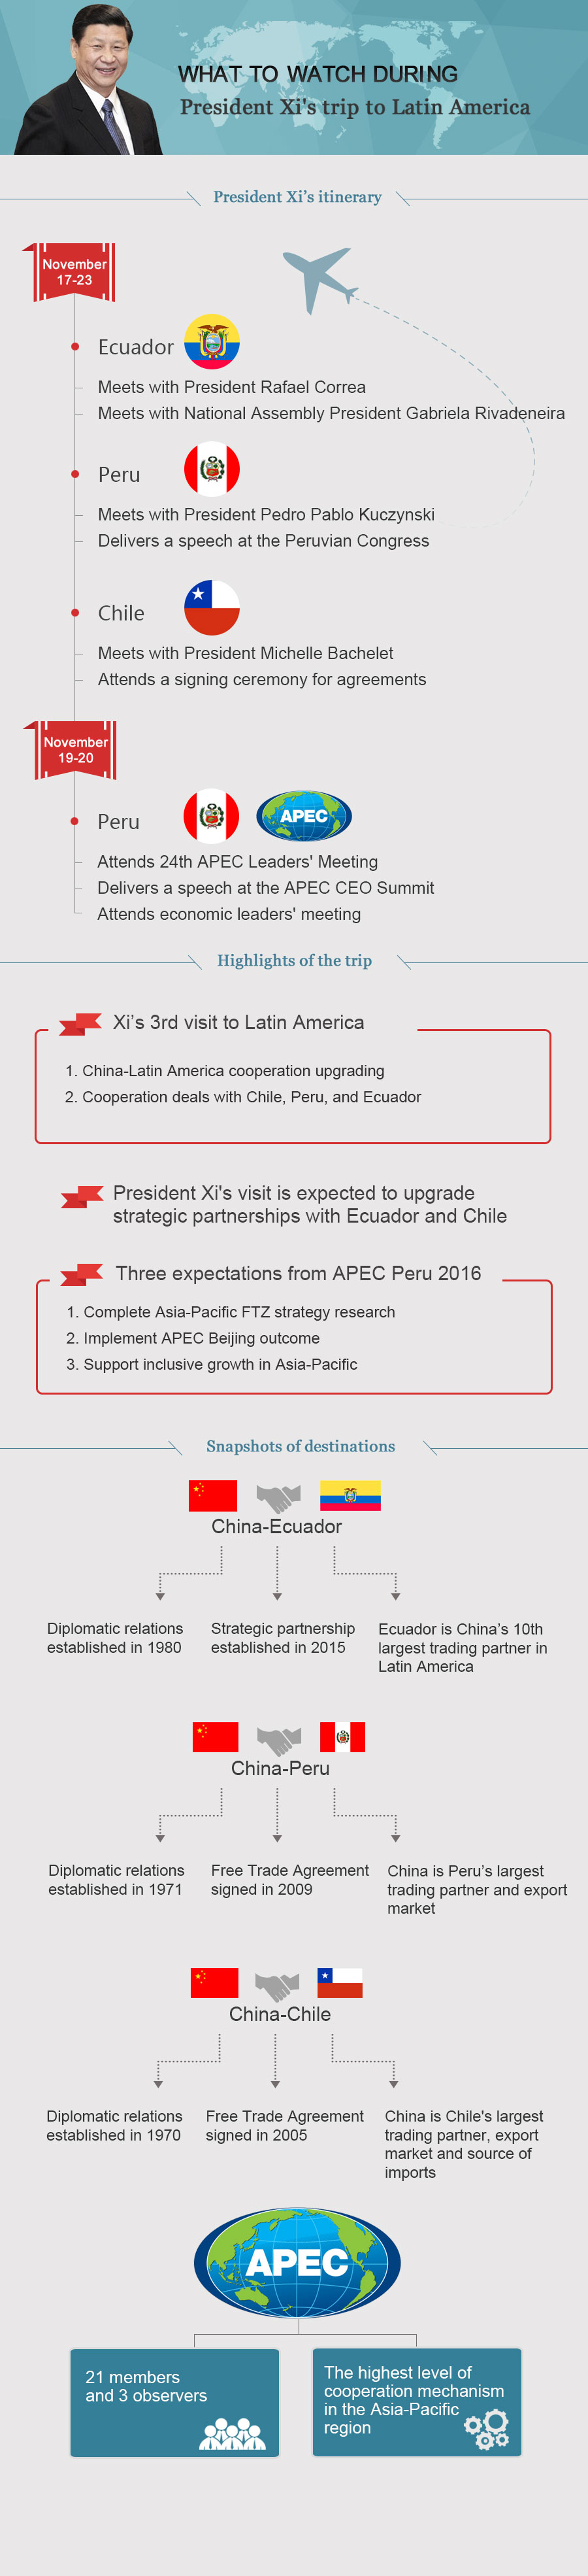 What to watch during Xi's trip to Latin America